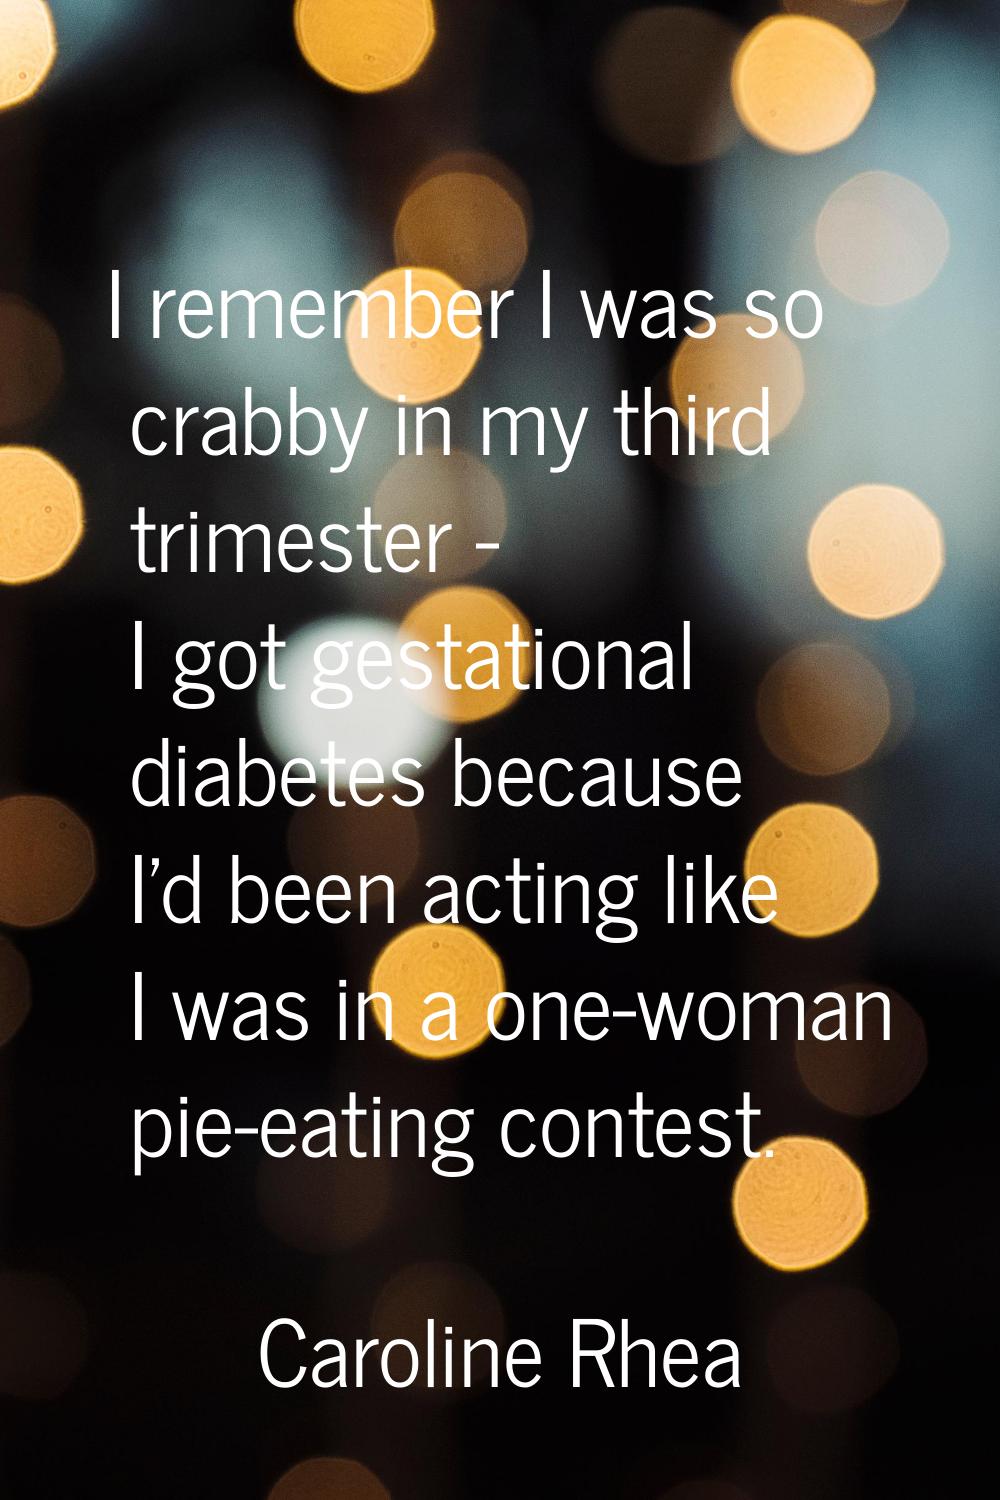 I remember I was so crabby in my third trimester - I got gestational diabetes because I'd been acti